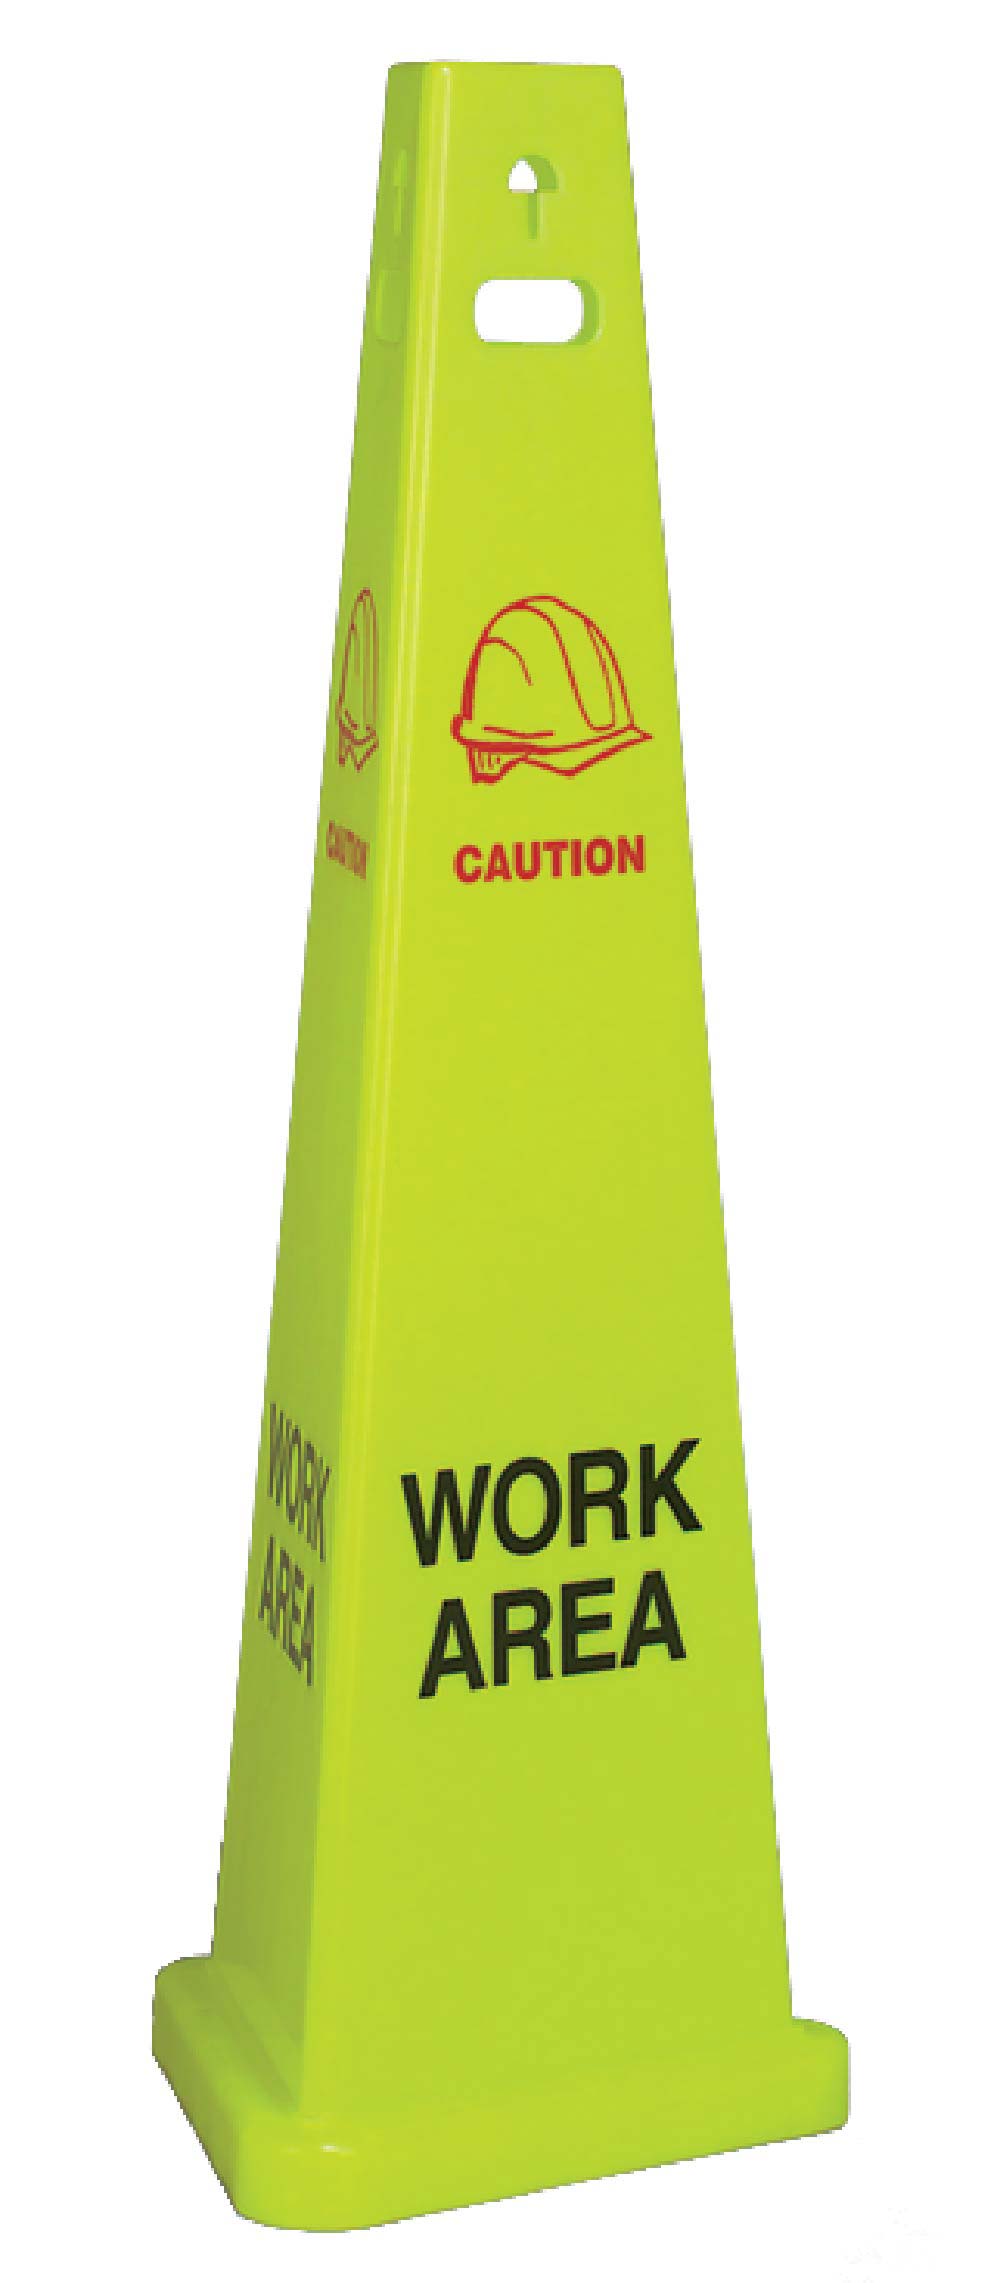 Work Area Trivu 3-Sided Safety Cone - Case of 3-eSafety Supplies, Inc